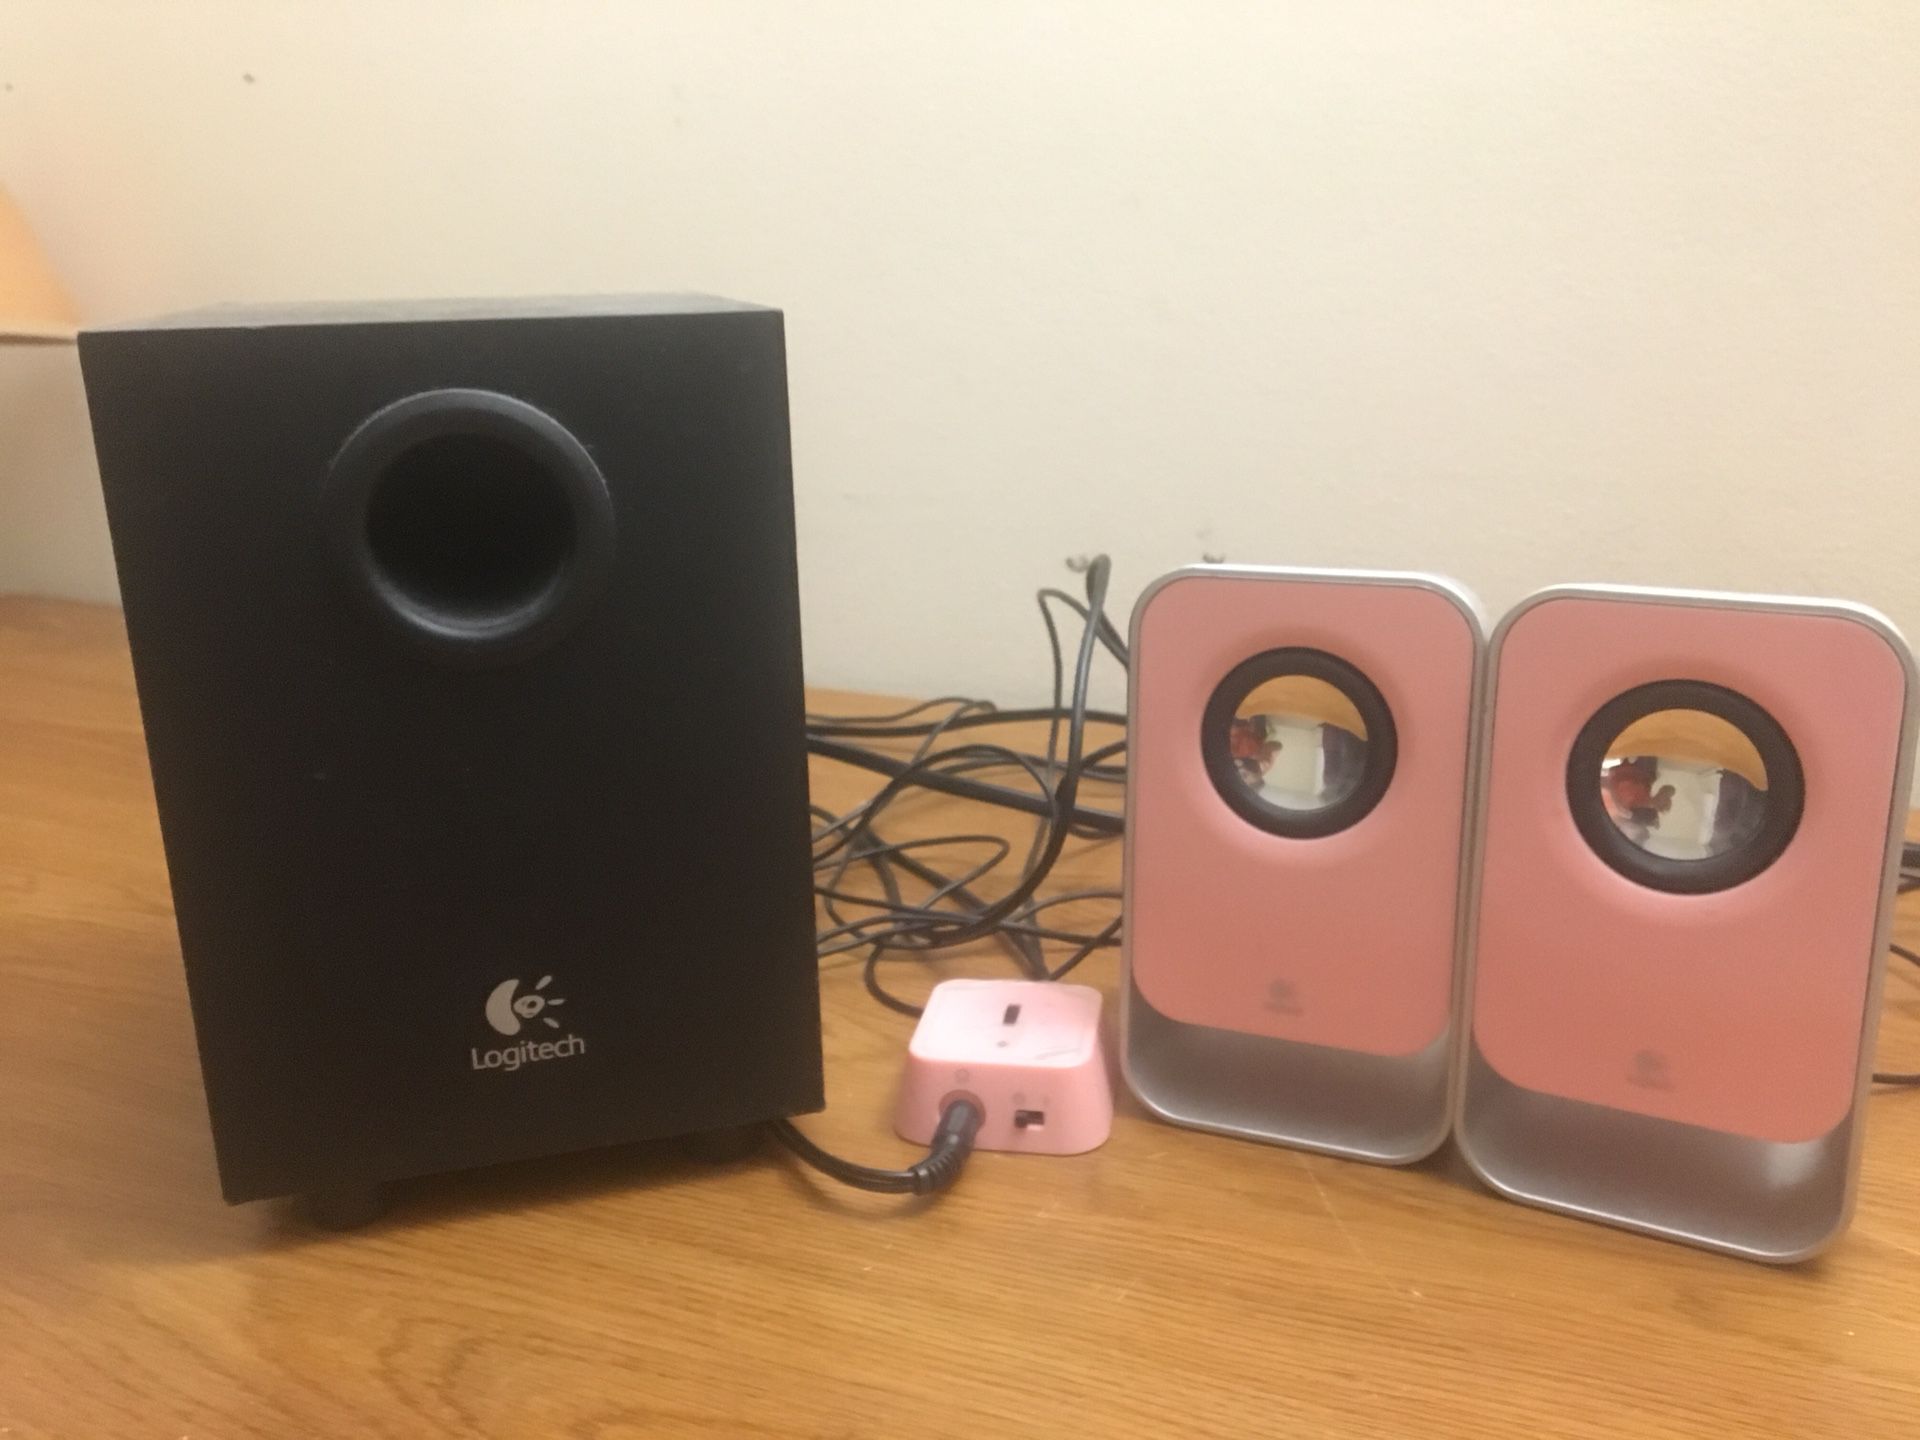 Logitech - 2.1 Stereo Speaker System, in Pink. Like New for Sale in Lowell, MA -